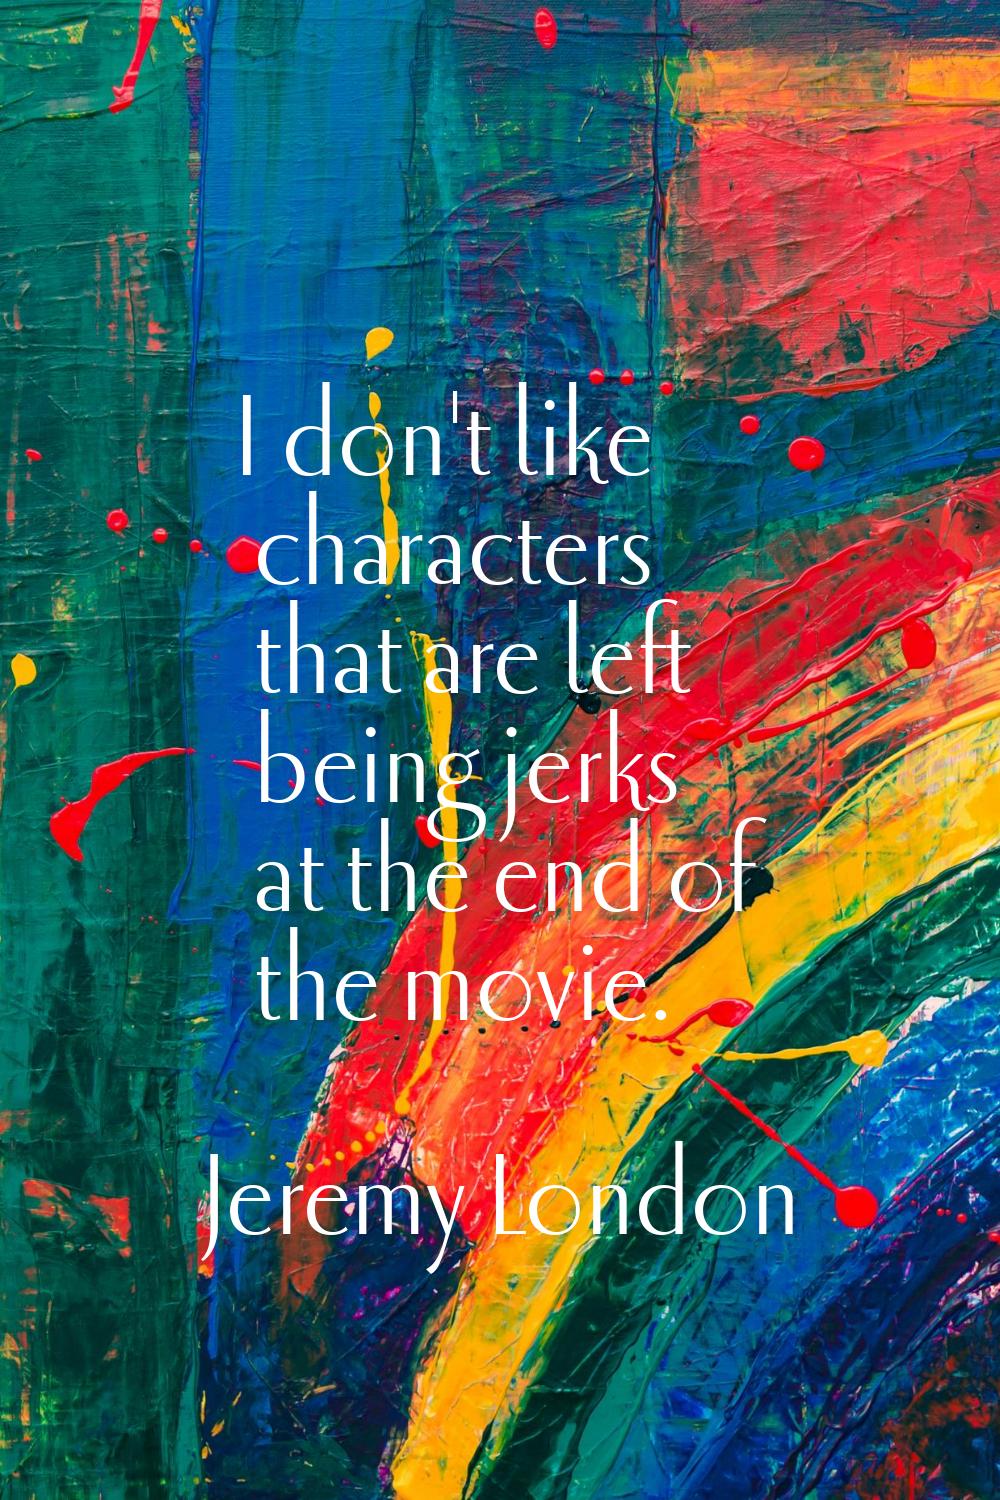 I don't like characters that are left being jerks at the end of the movie.